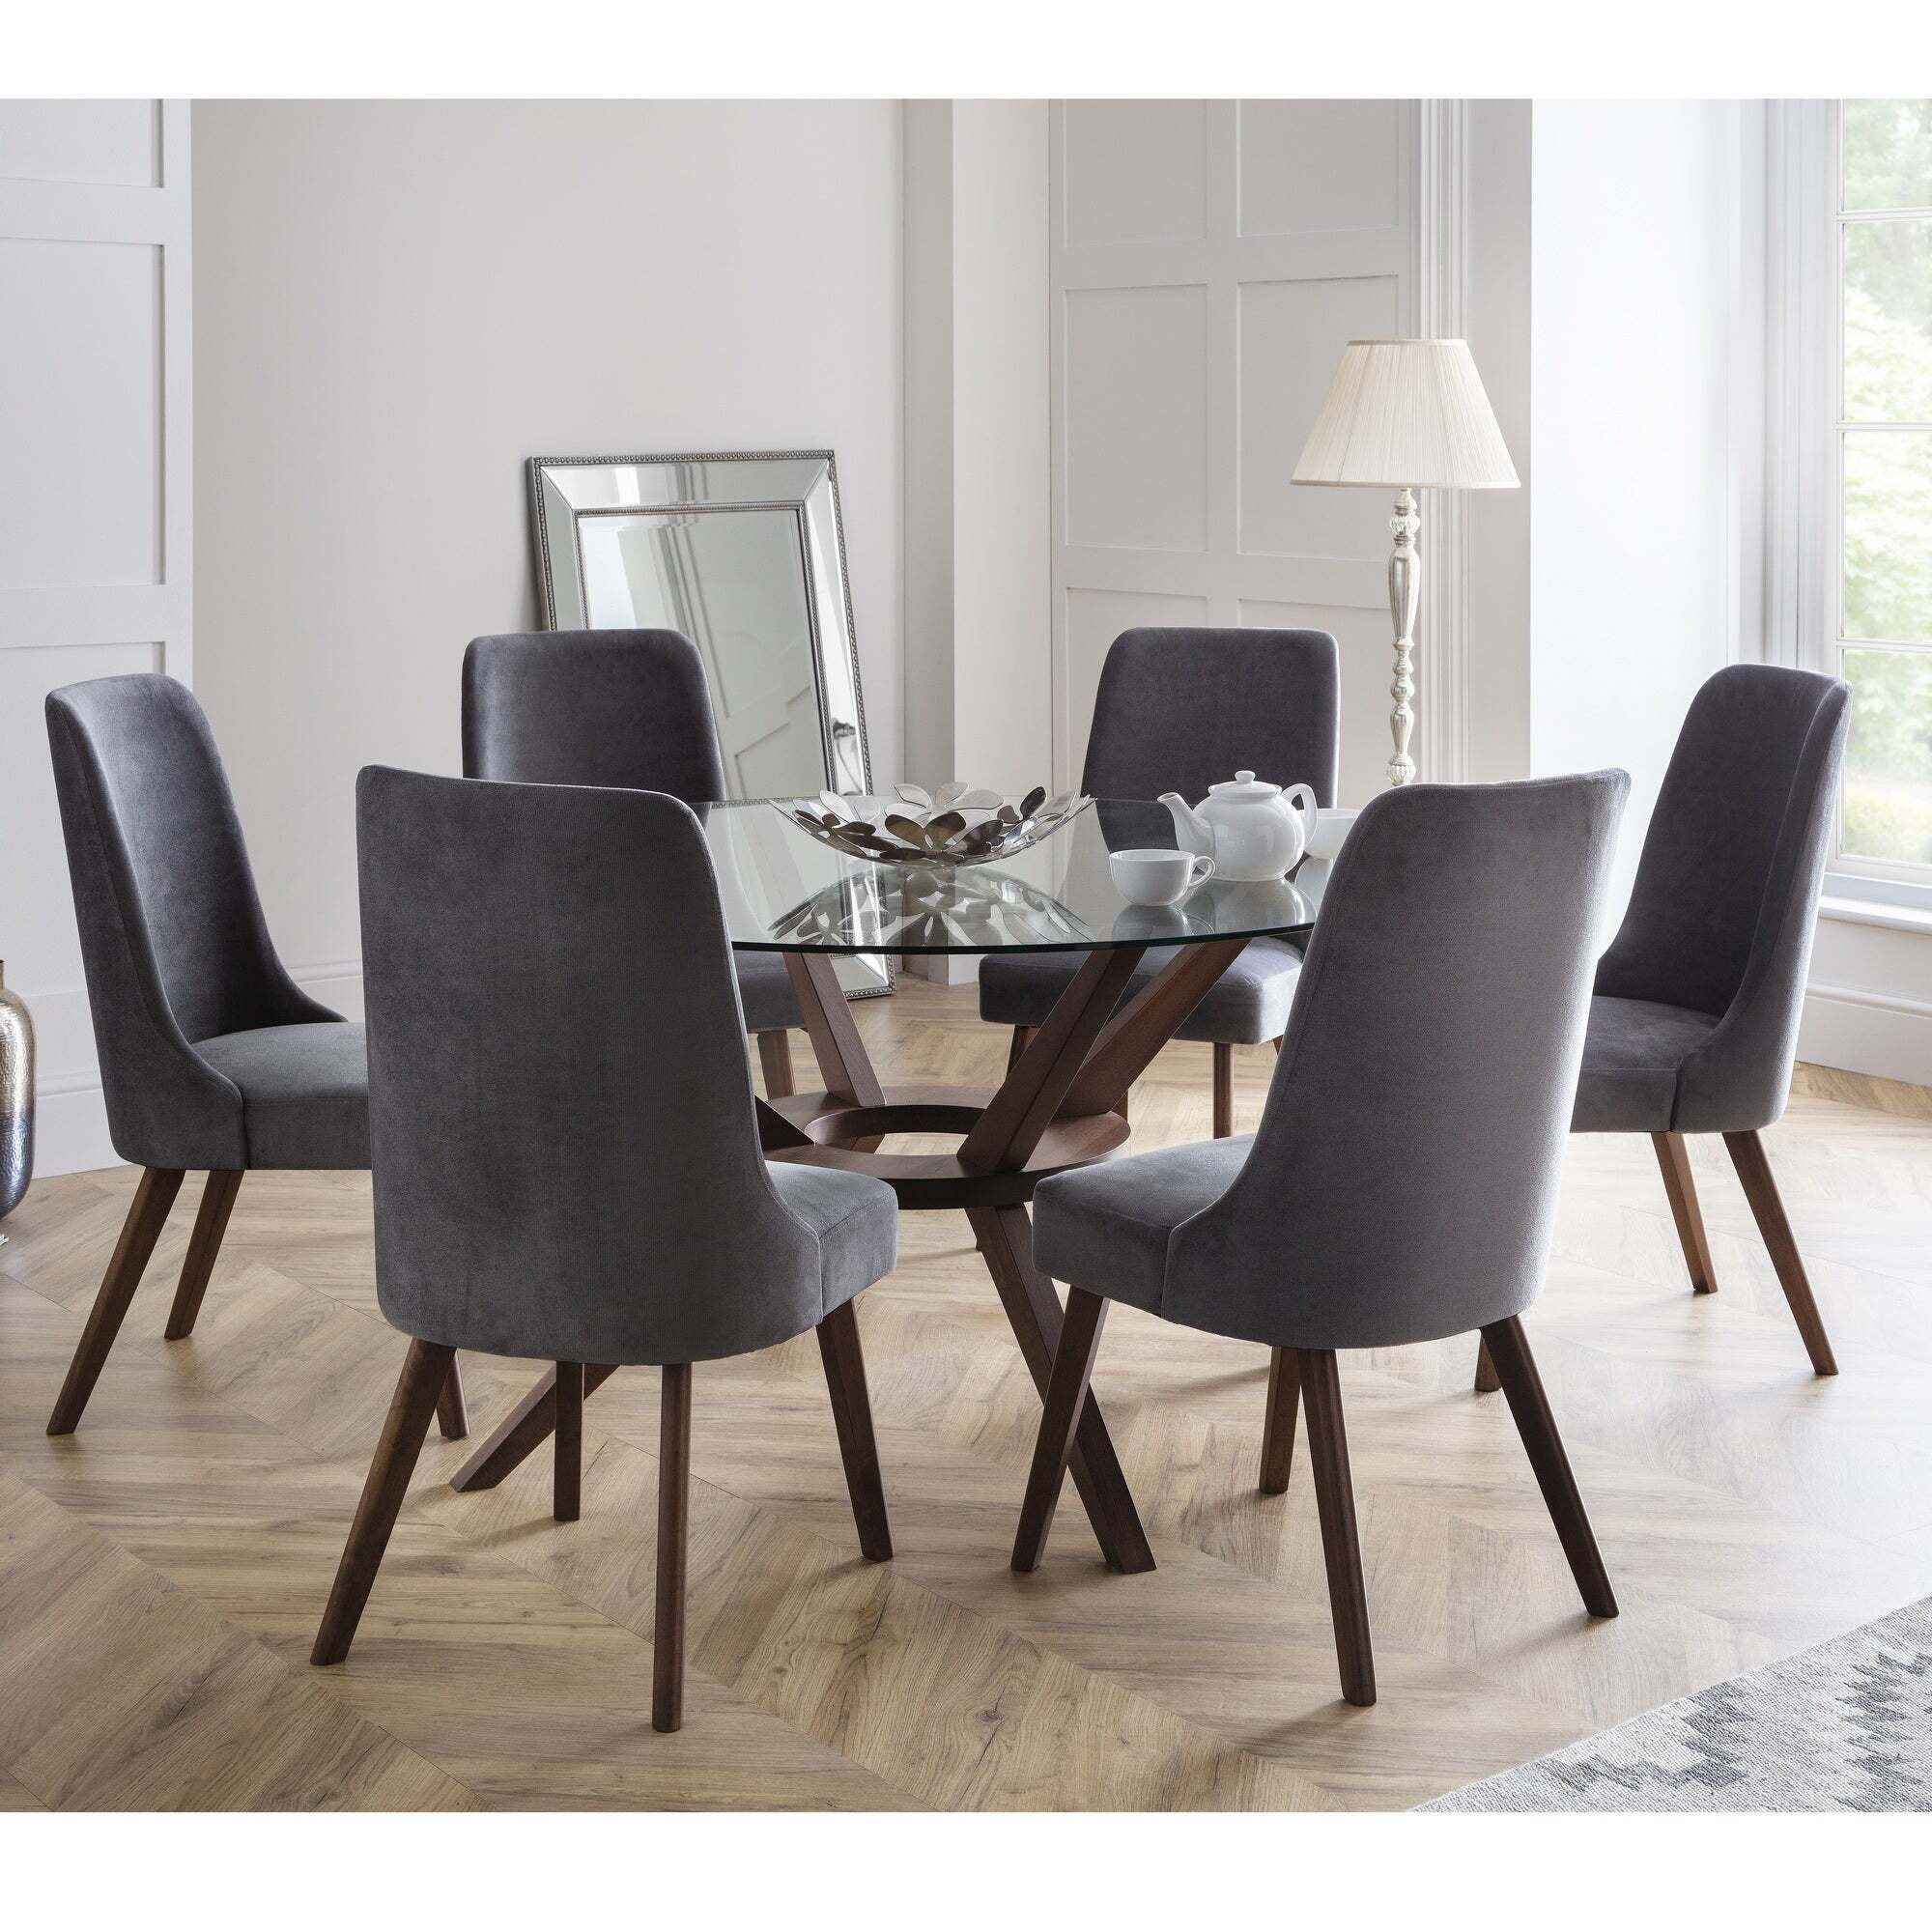 Chelsea Round Glass Top Dining Table with 6 Huxley Chairs Brown